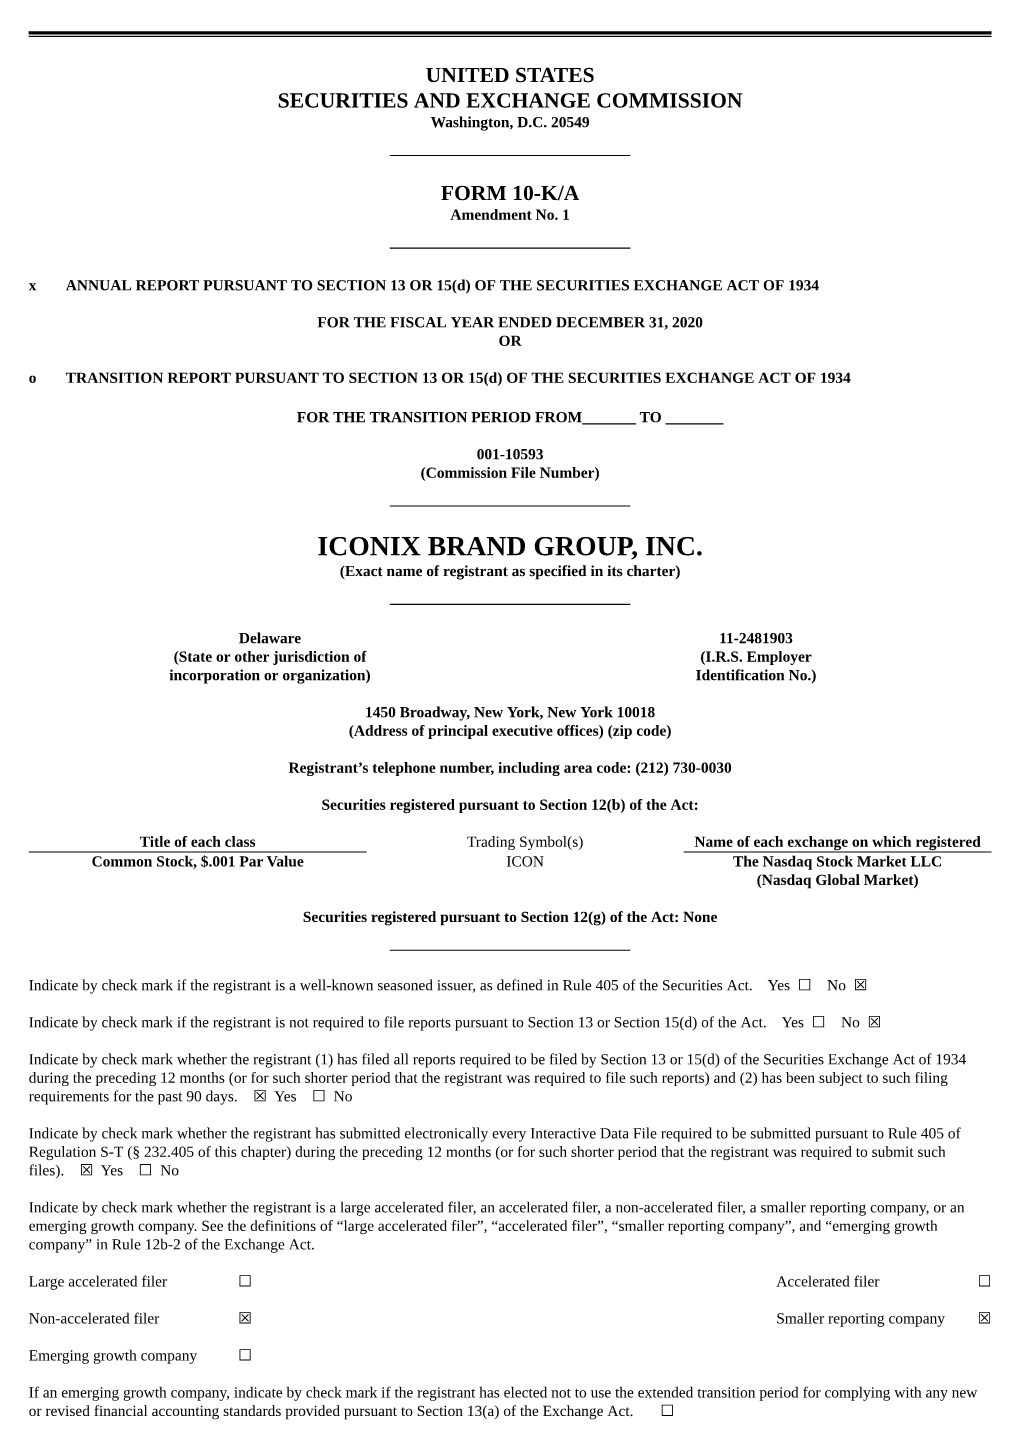 ICONIX BRAND GROUP, INC. (Exact Name of Registrant As Specified in Its Charter)